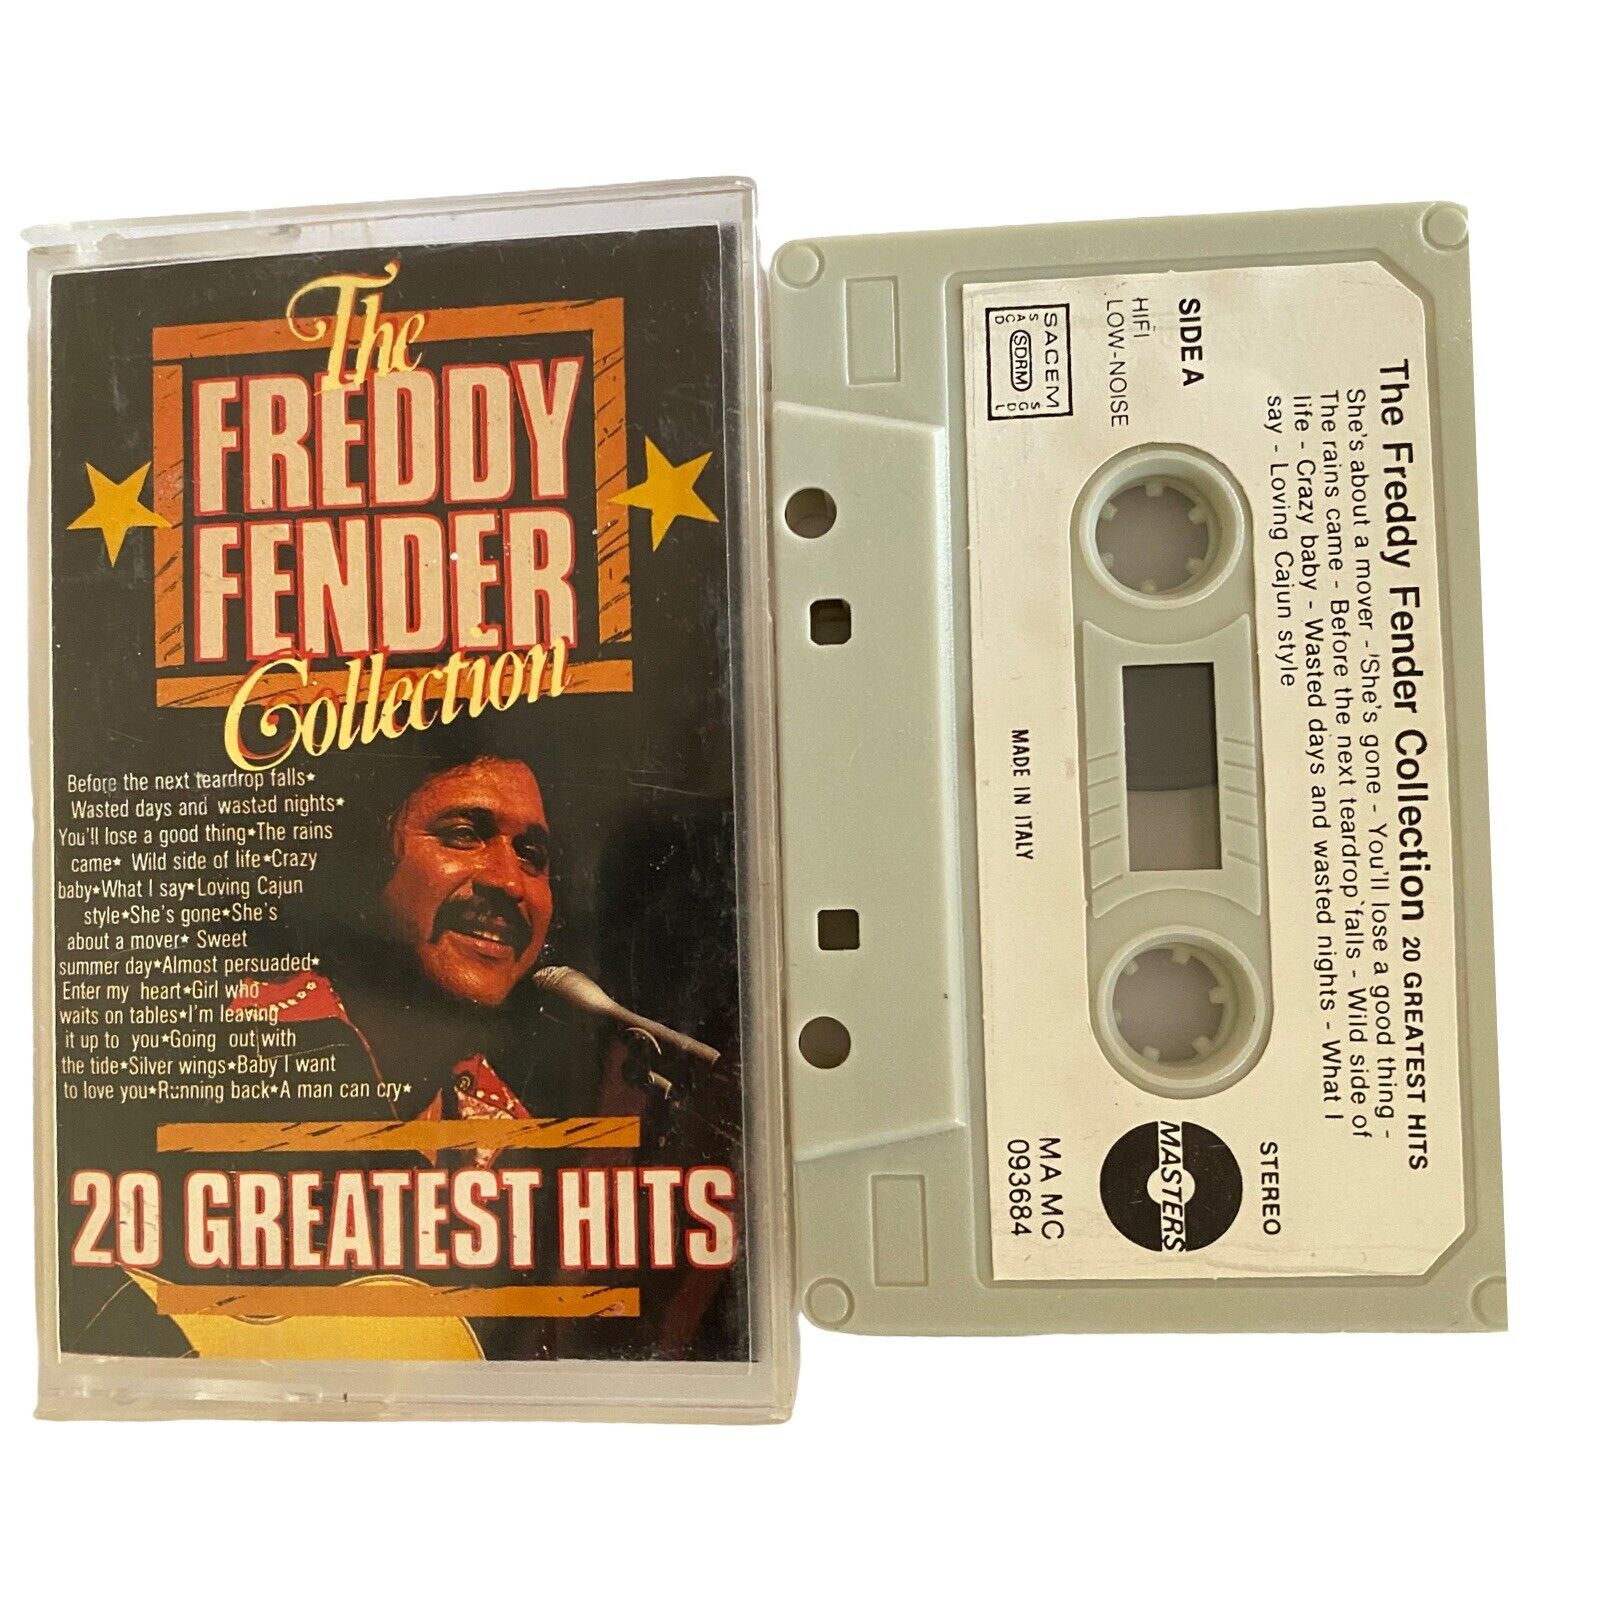 Freddy Fender-Collection 20 Greatest Hits. Cassette Tape. 